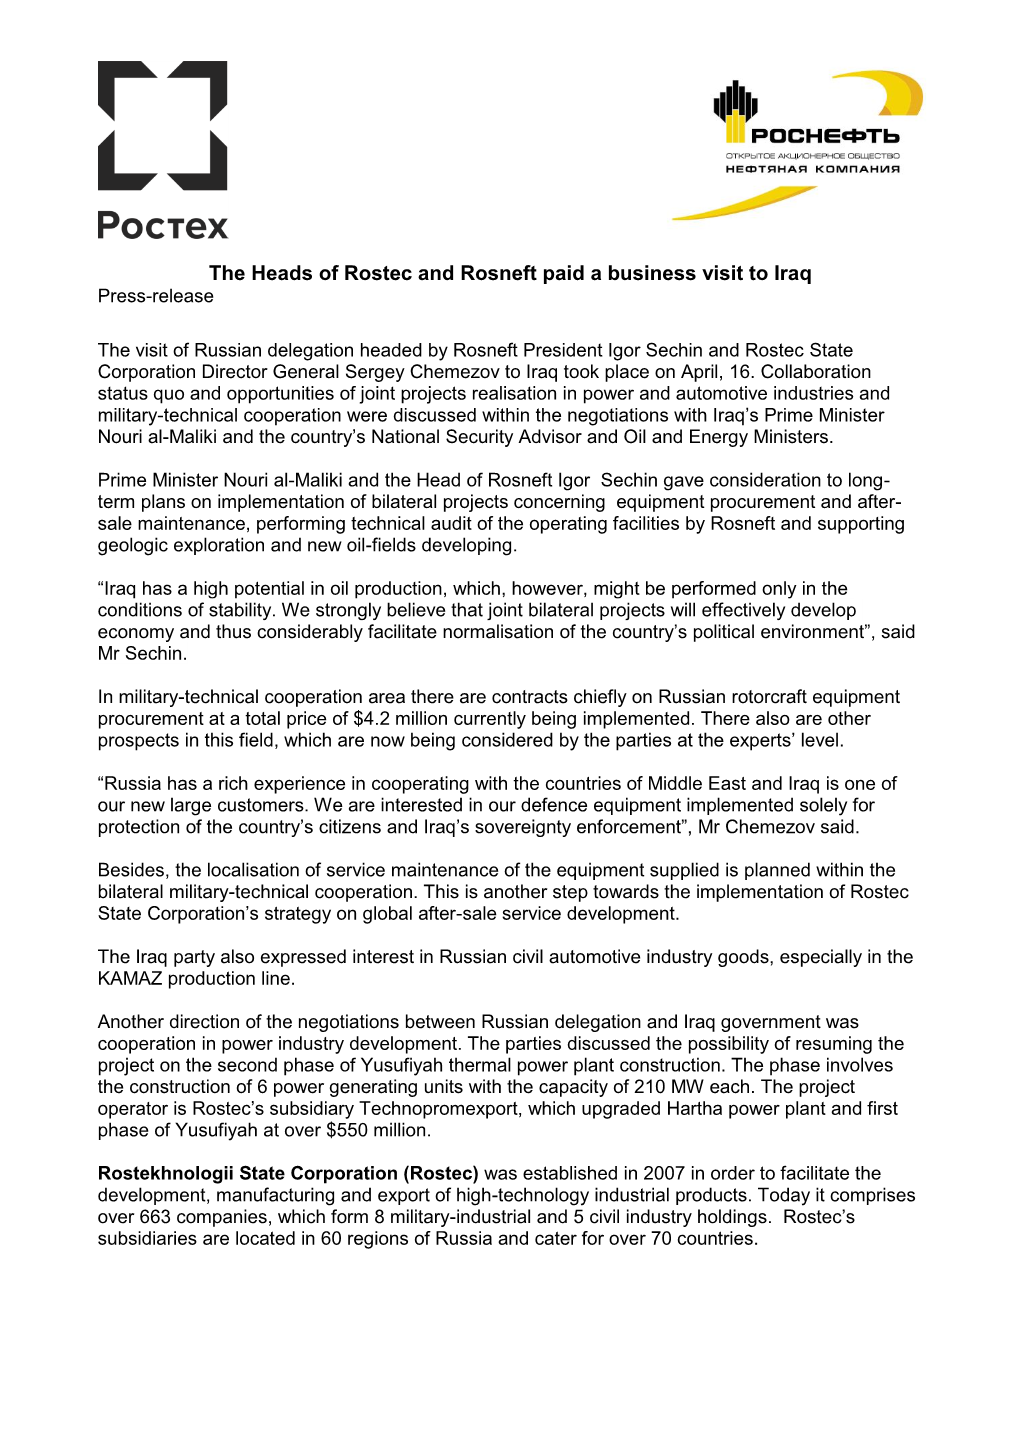 The Heads of Rostec and Rosneft Paid a Business Visit to Iraq Press-Release